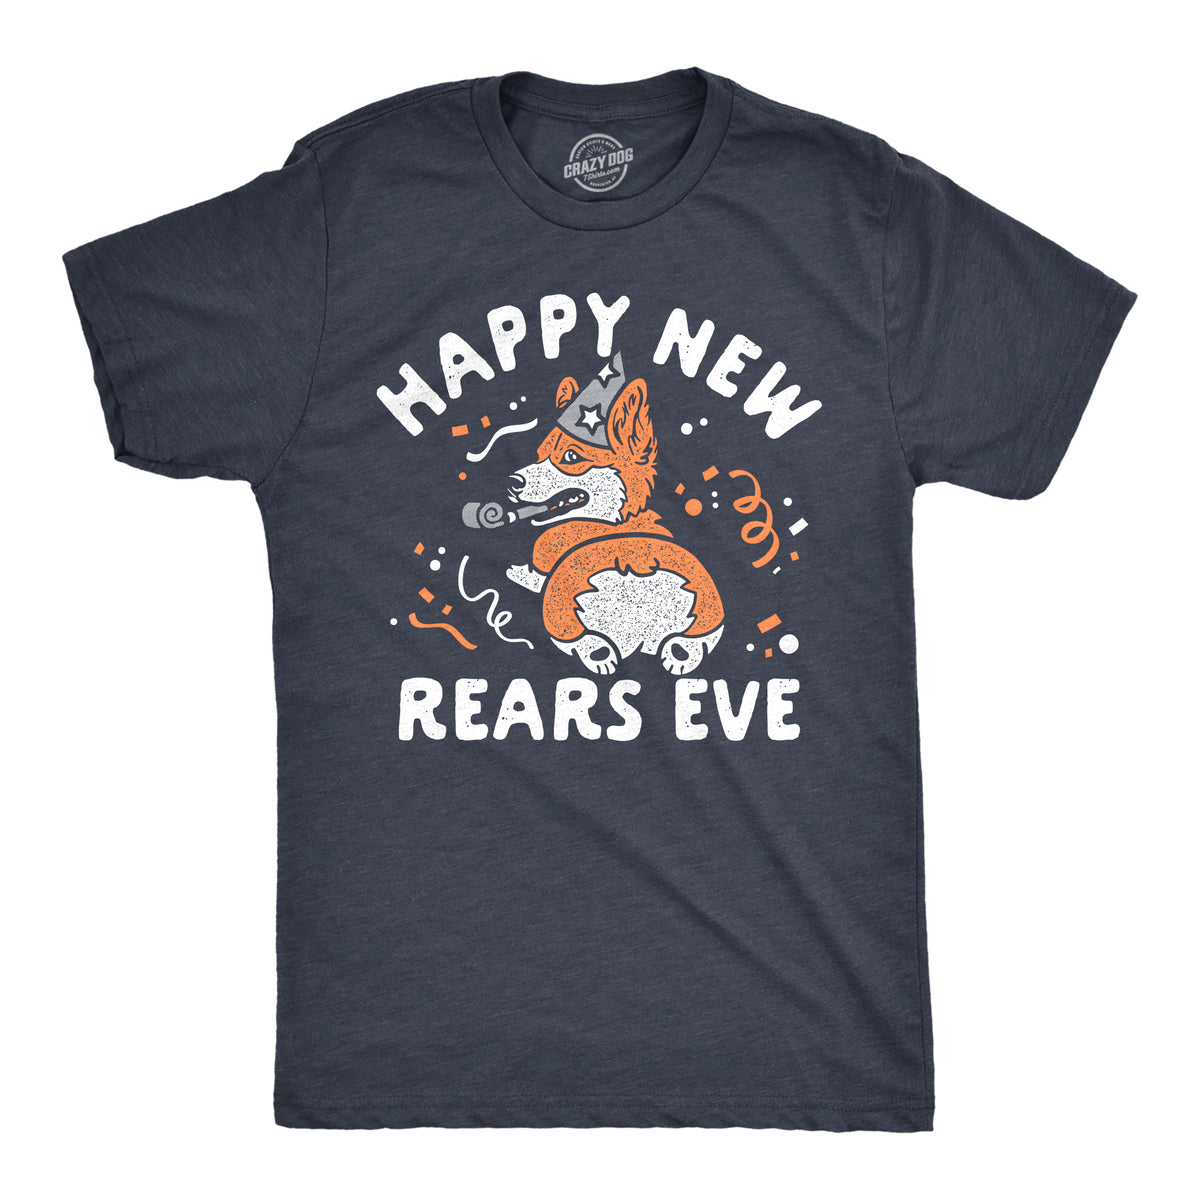 Funny Heather Navy - REARS Happy New Rears Eve Mens T Shirt Nerdy New Years Dog sarcastic Tee